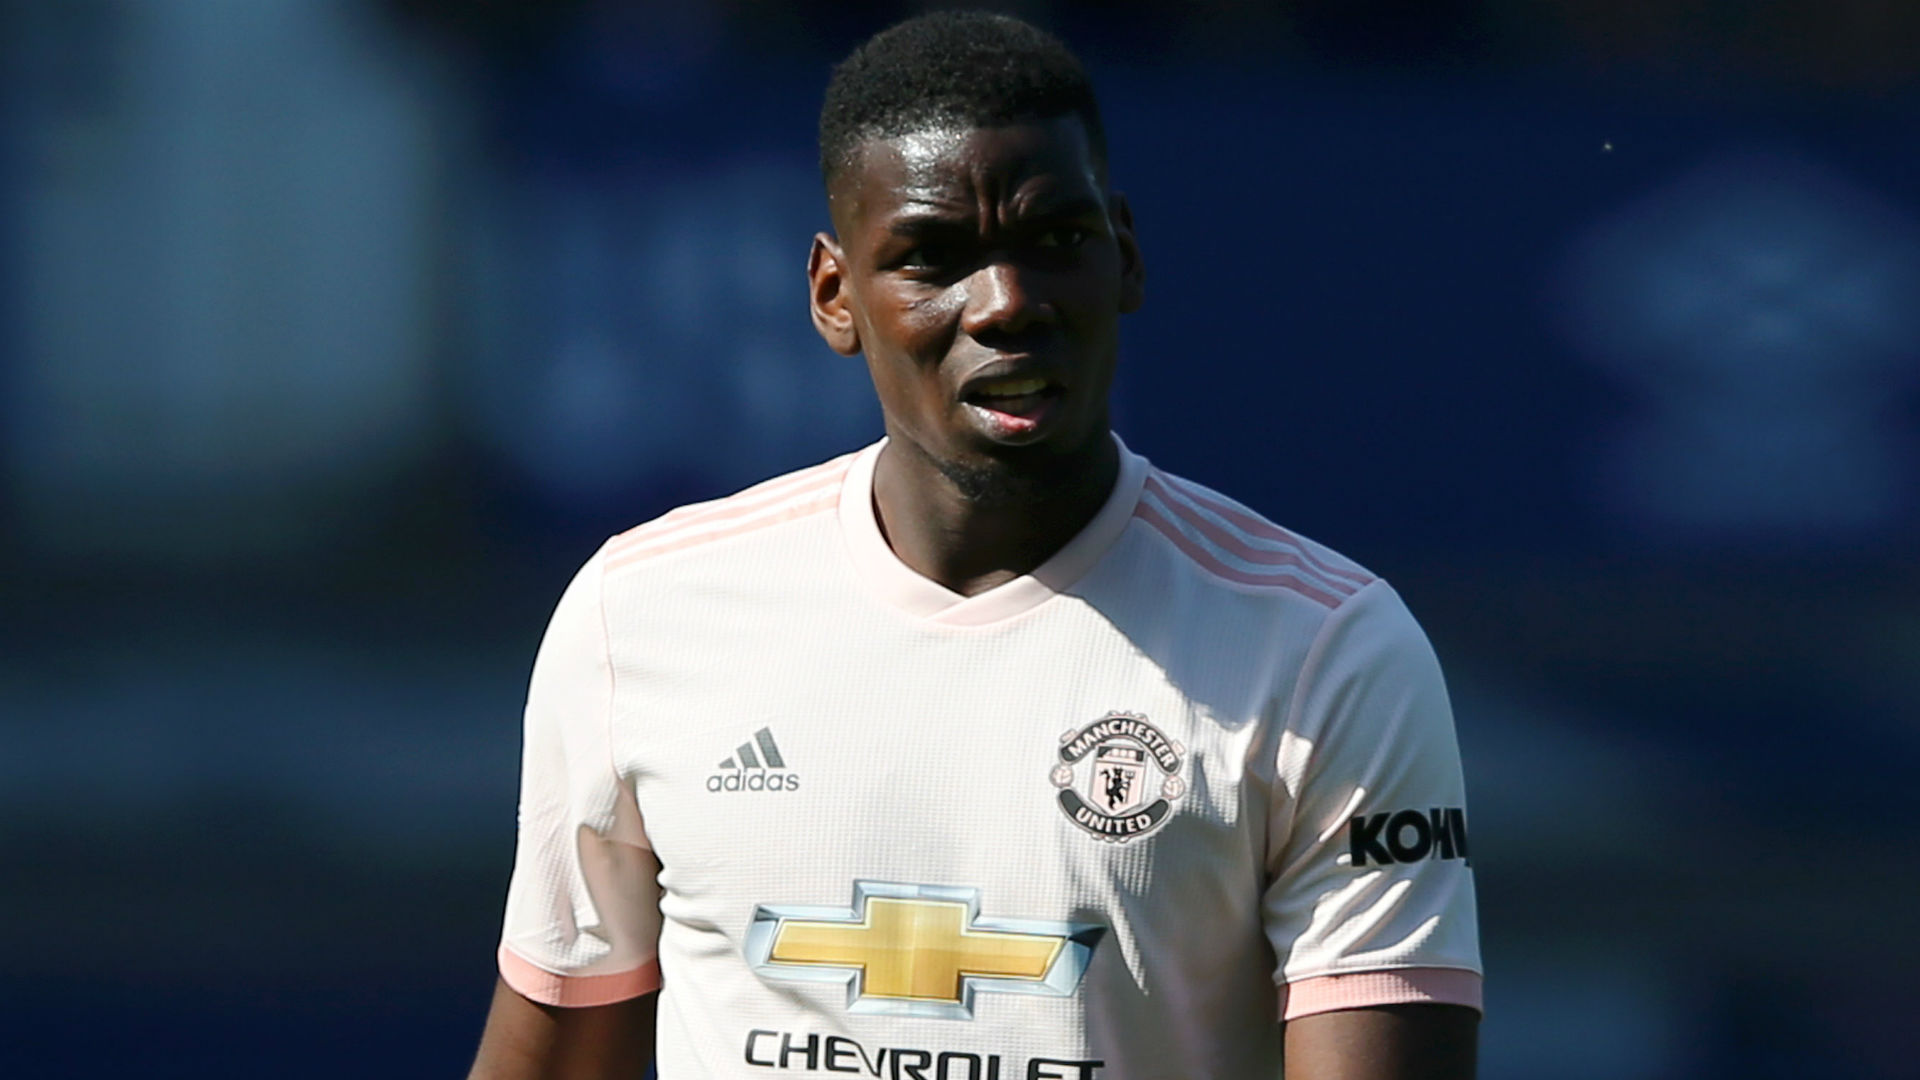 Manchester United were humiliated by Everton on Sunday and Paul Pogba has demanded a response in a passionate rallying cry.